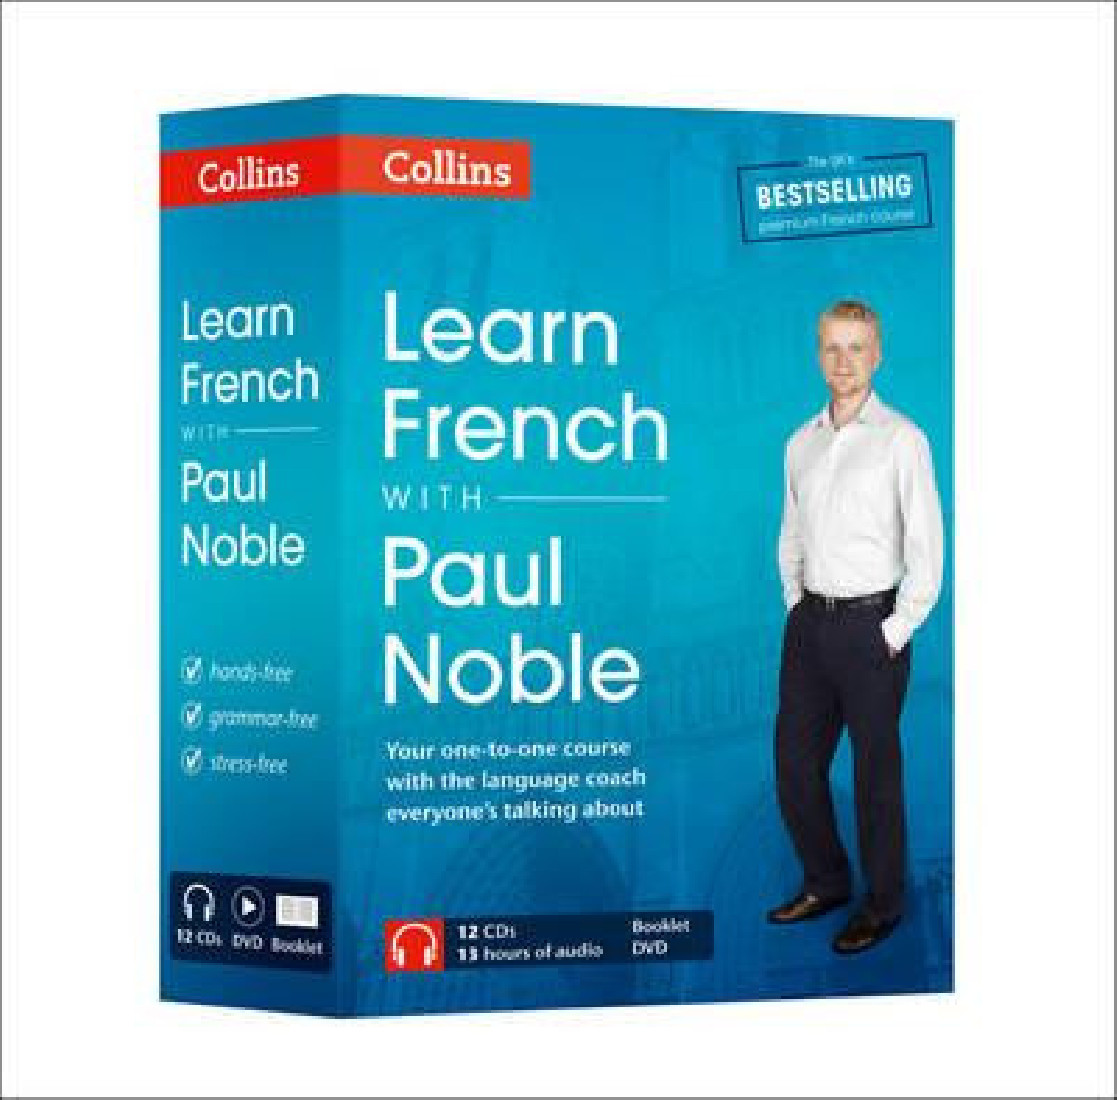 COLLINS FRENCH (+ CD + DVD) WITH PAUL NOBLE